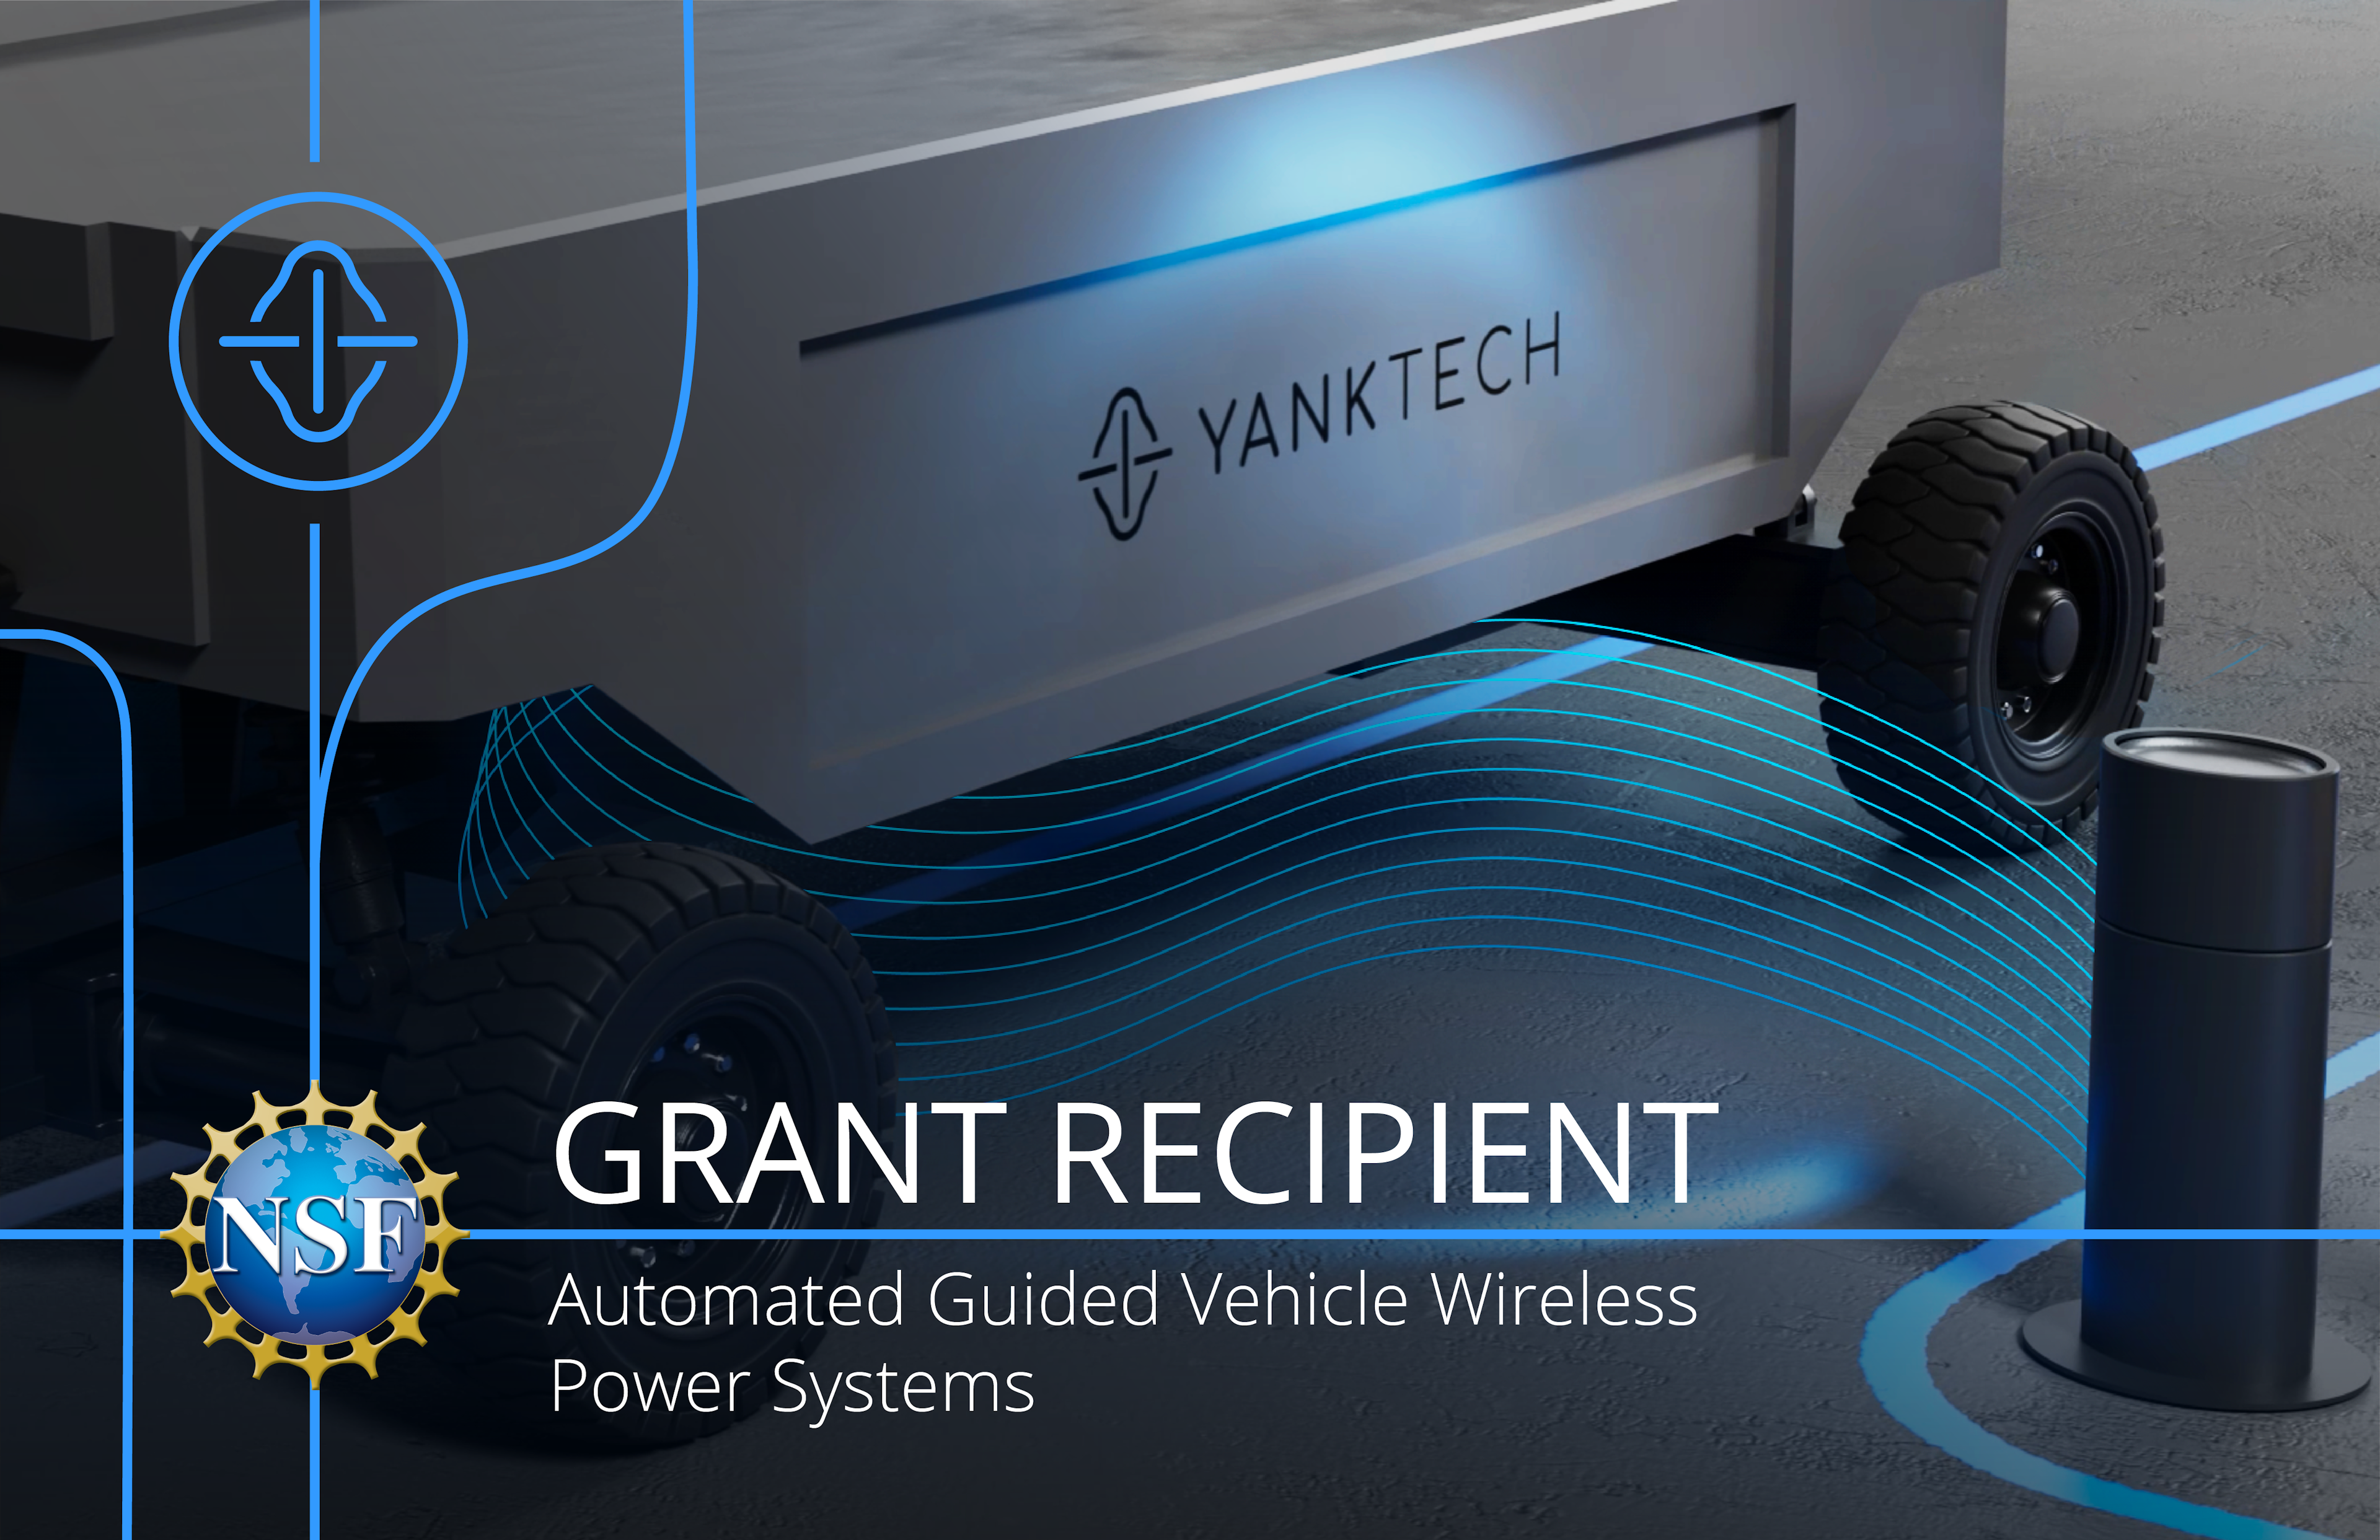 NSF Grant Recipient for Automated Guided Vehicles Wireless Power Systems's image